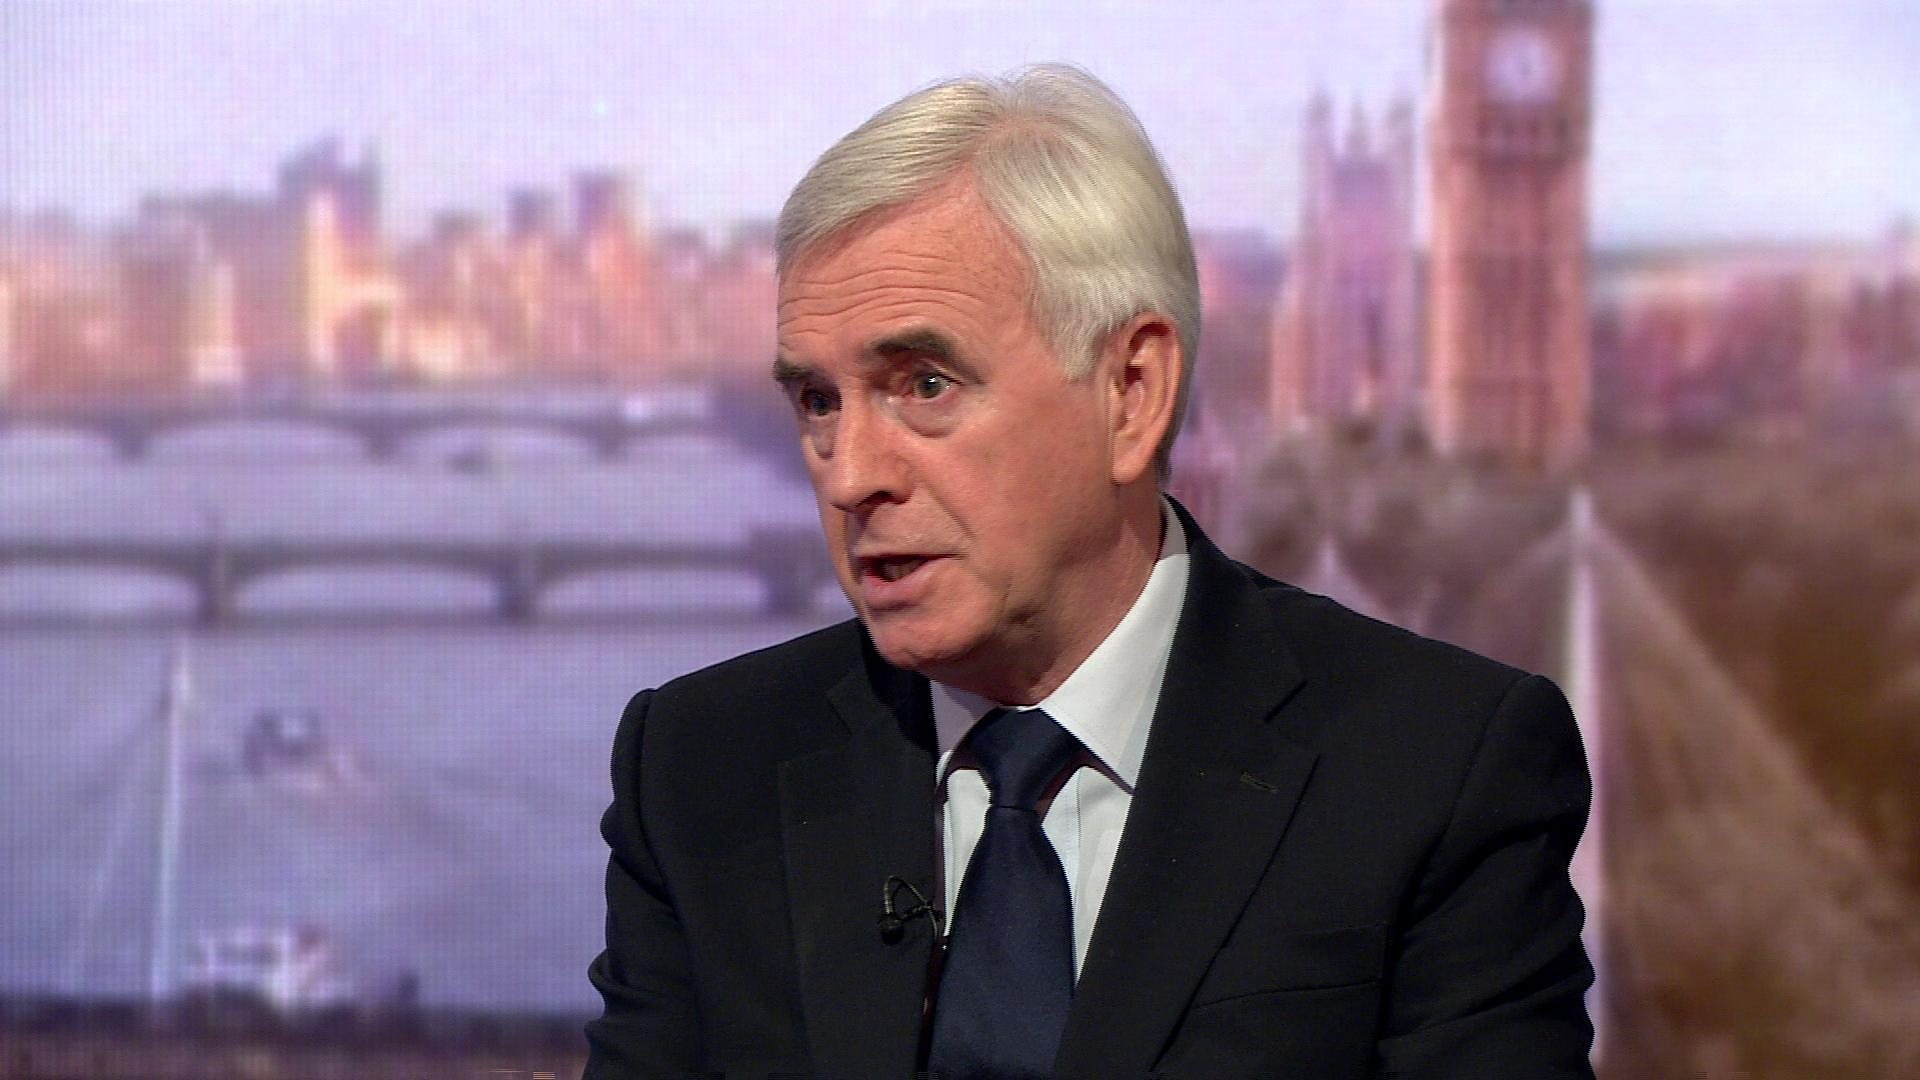 Image result for john mcdonnell on marr tv programme 7 may 2017